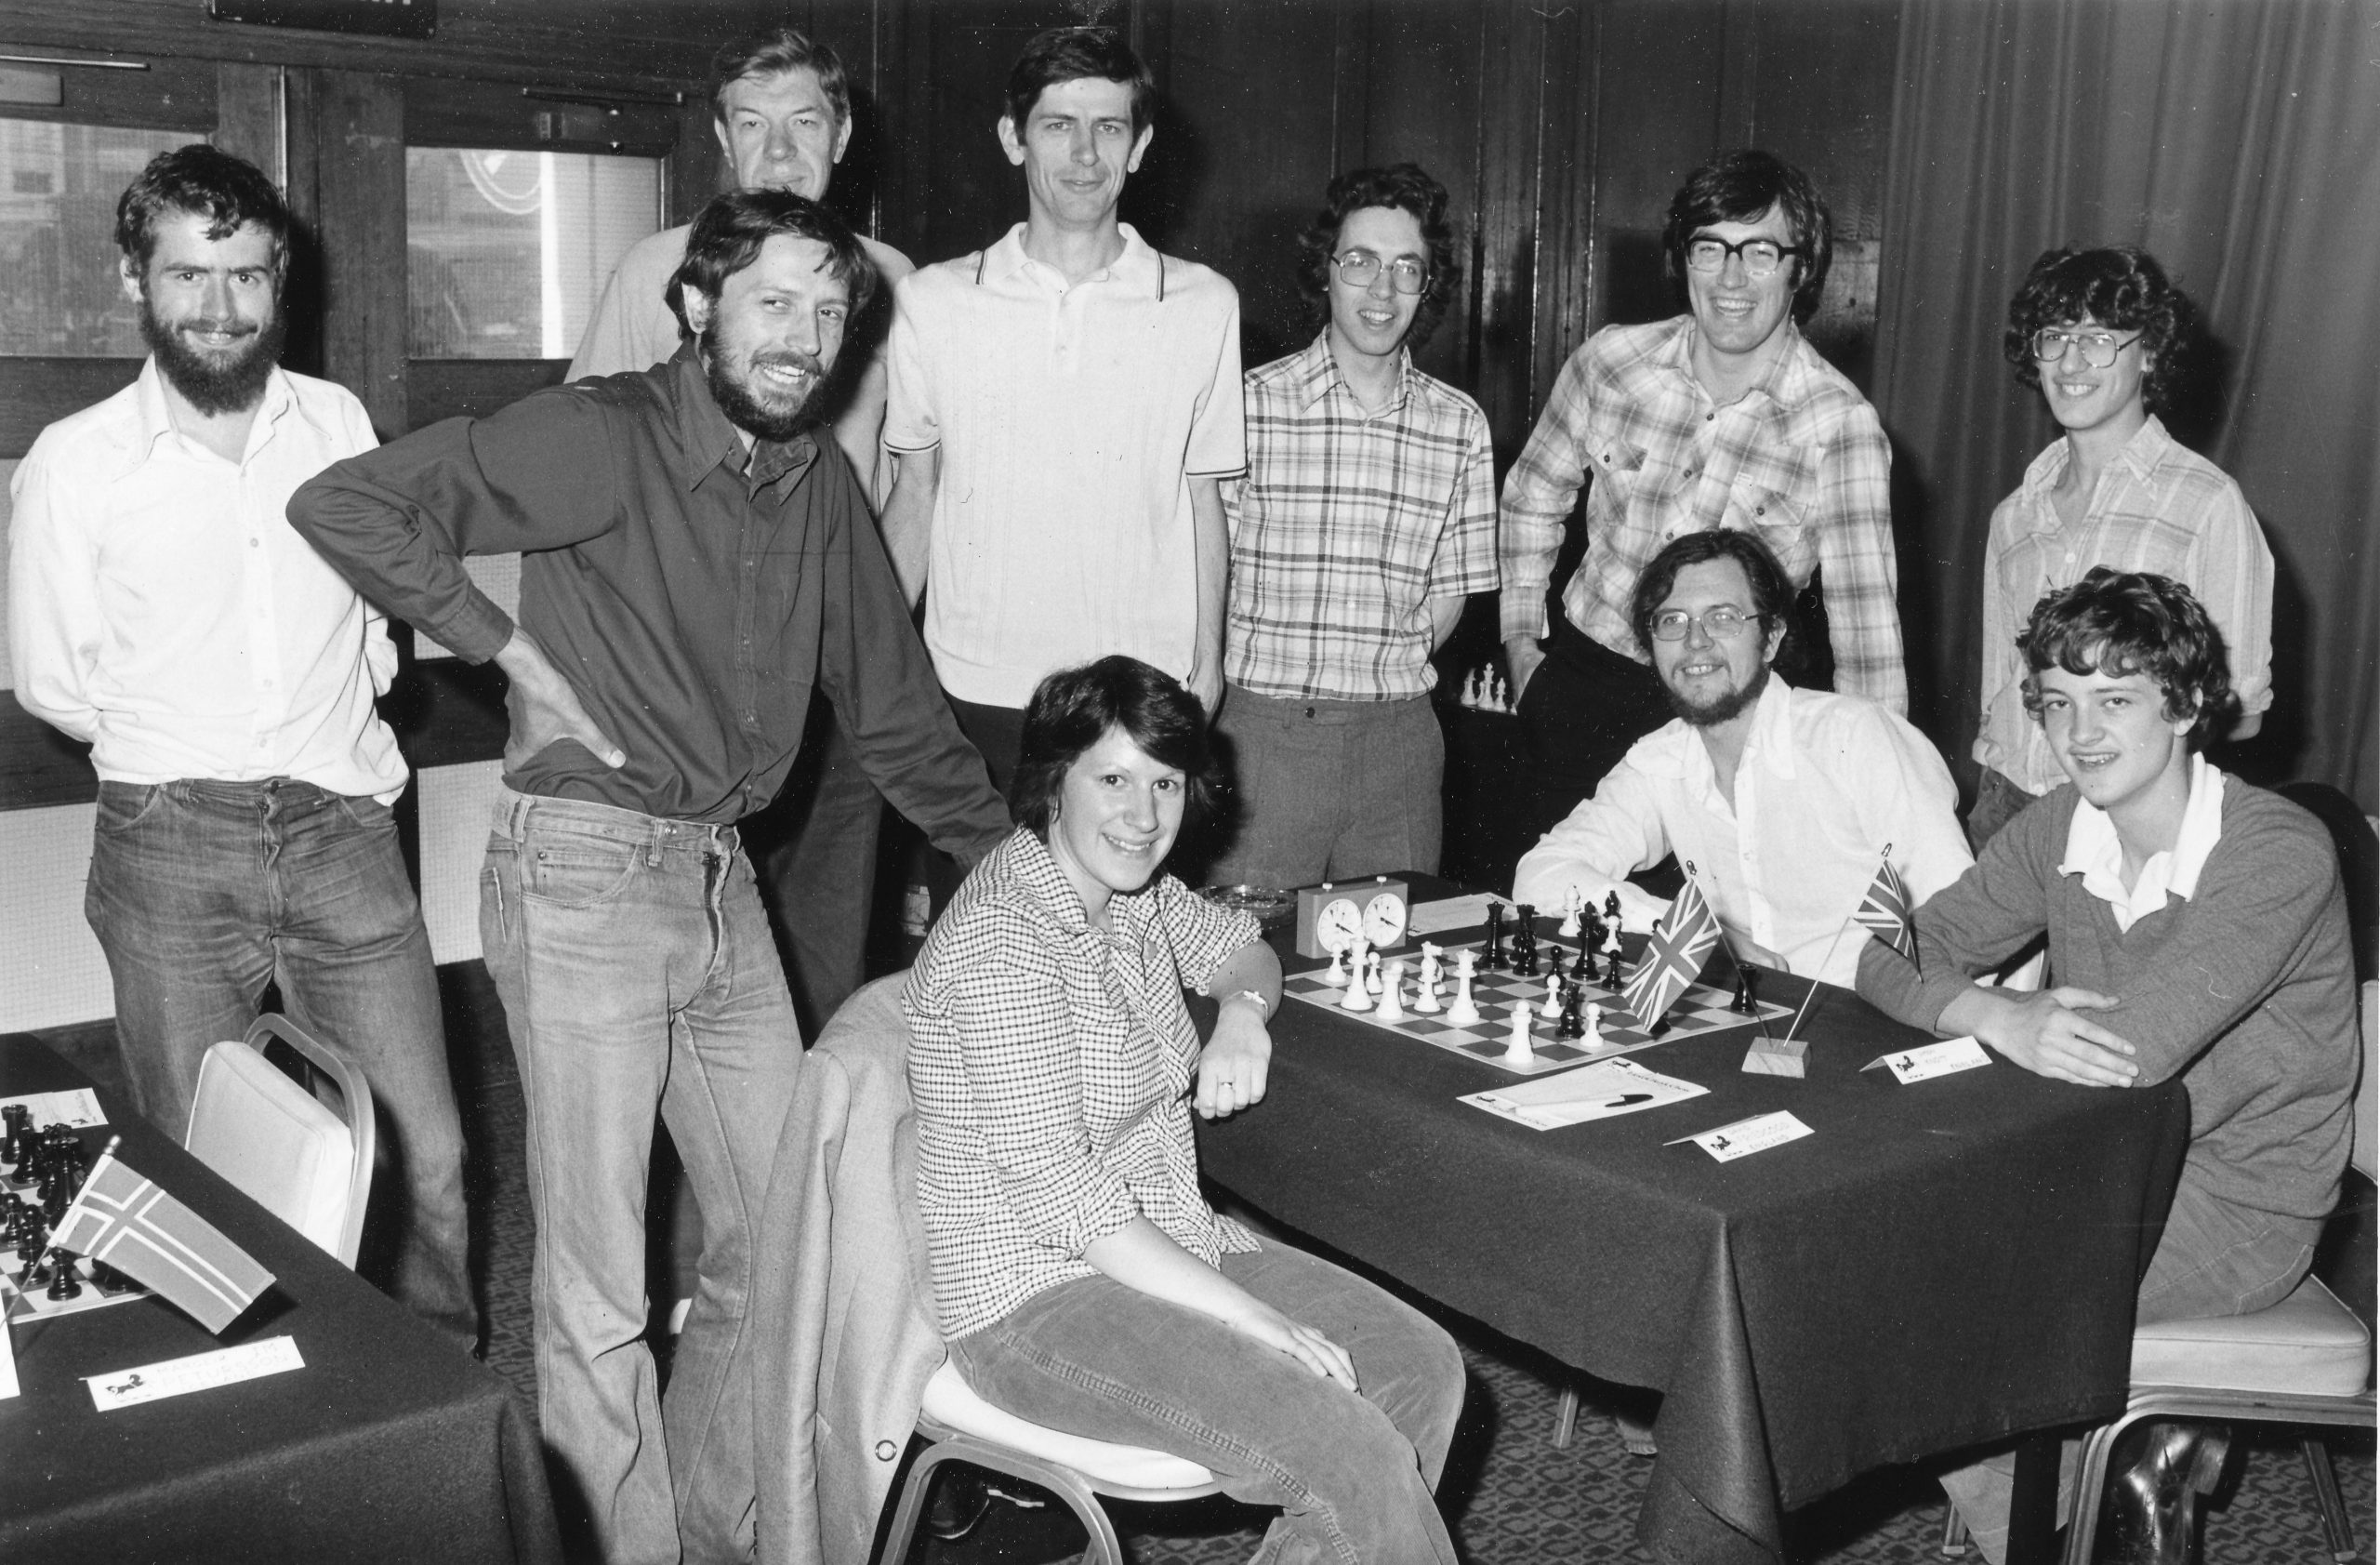 Michael and friends during the 1978 Lloyds Bank Masters